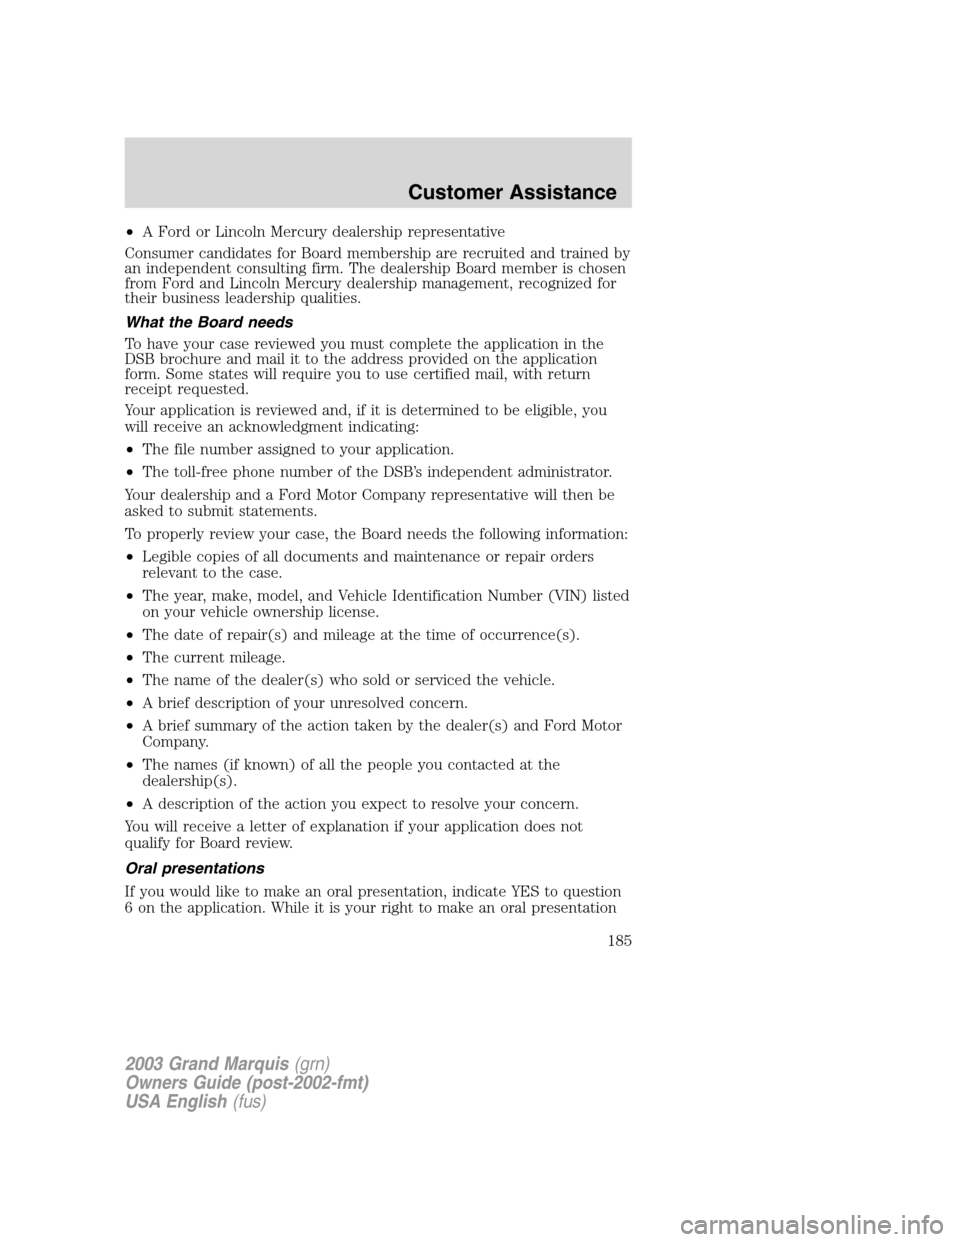 Mercury Grand Marquis 2003  s User Guide •A Ford or Lincoln Mercury dealership representative
Consumer candidates for Board membership are recruited and trained by
an independent consulting firm. The dealership Board member is chosen
from 